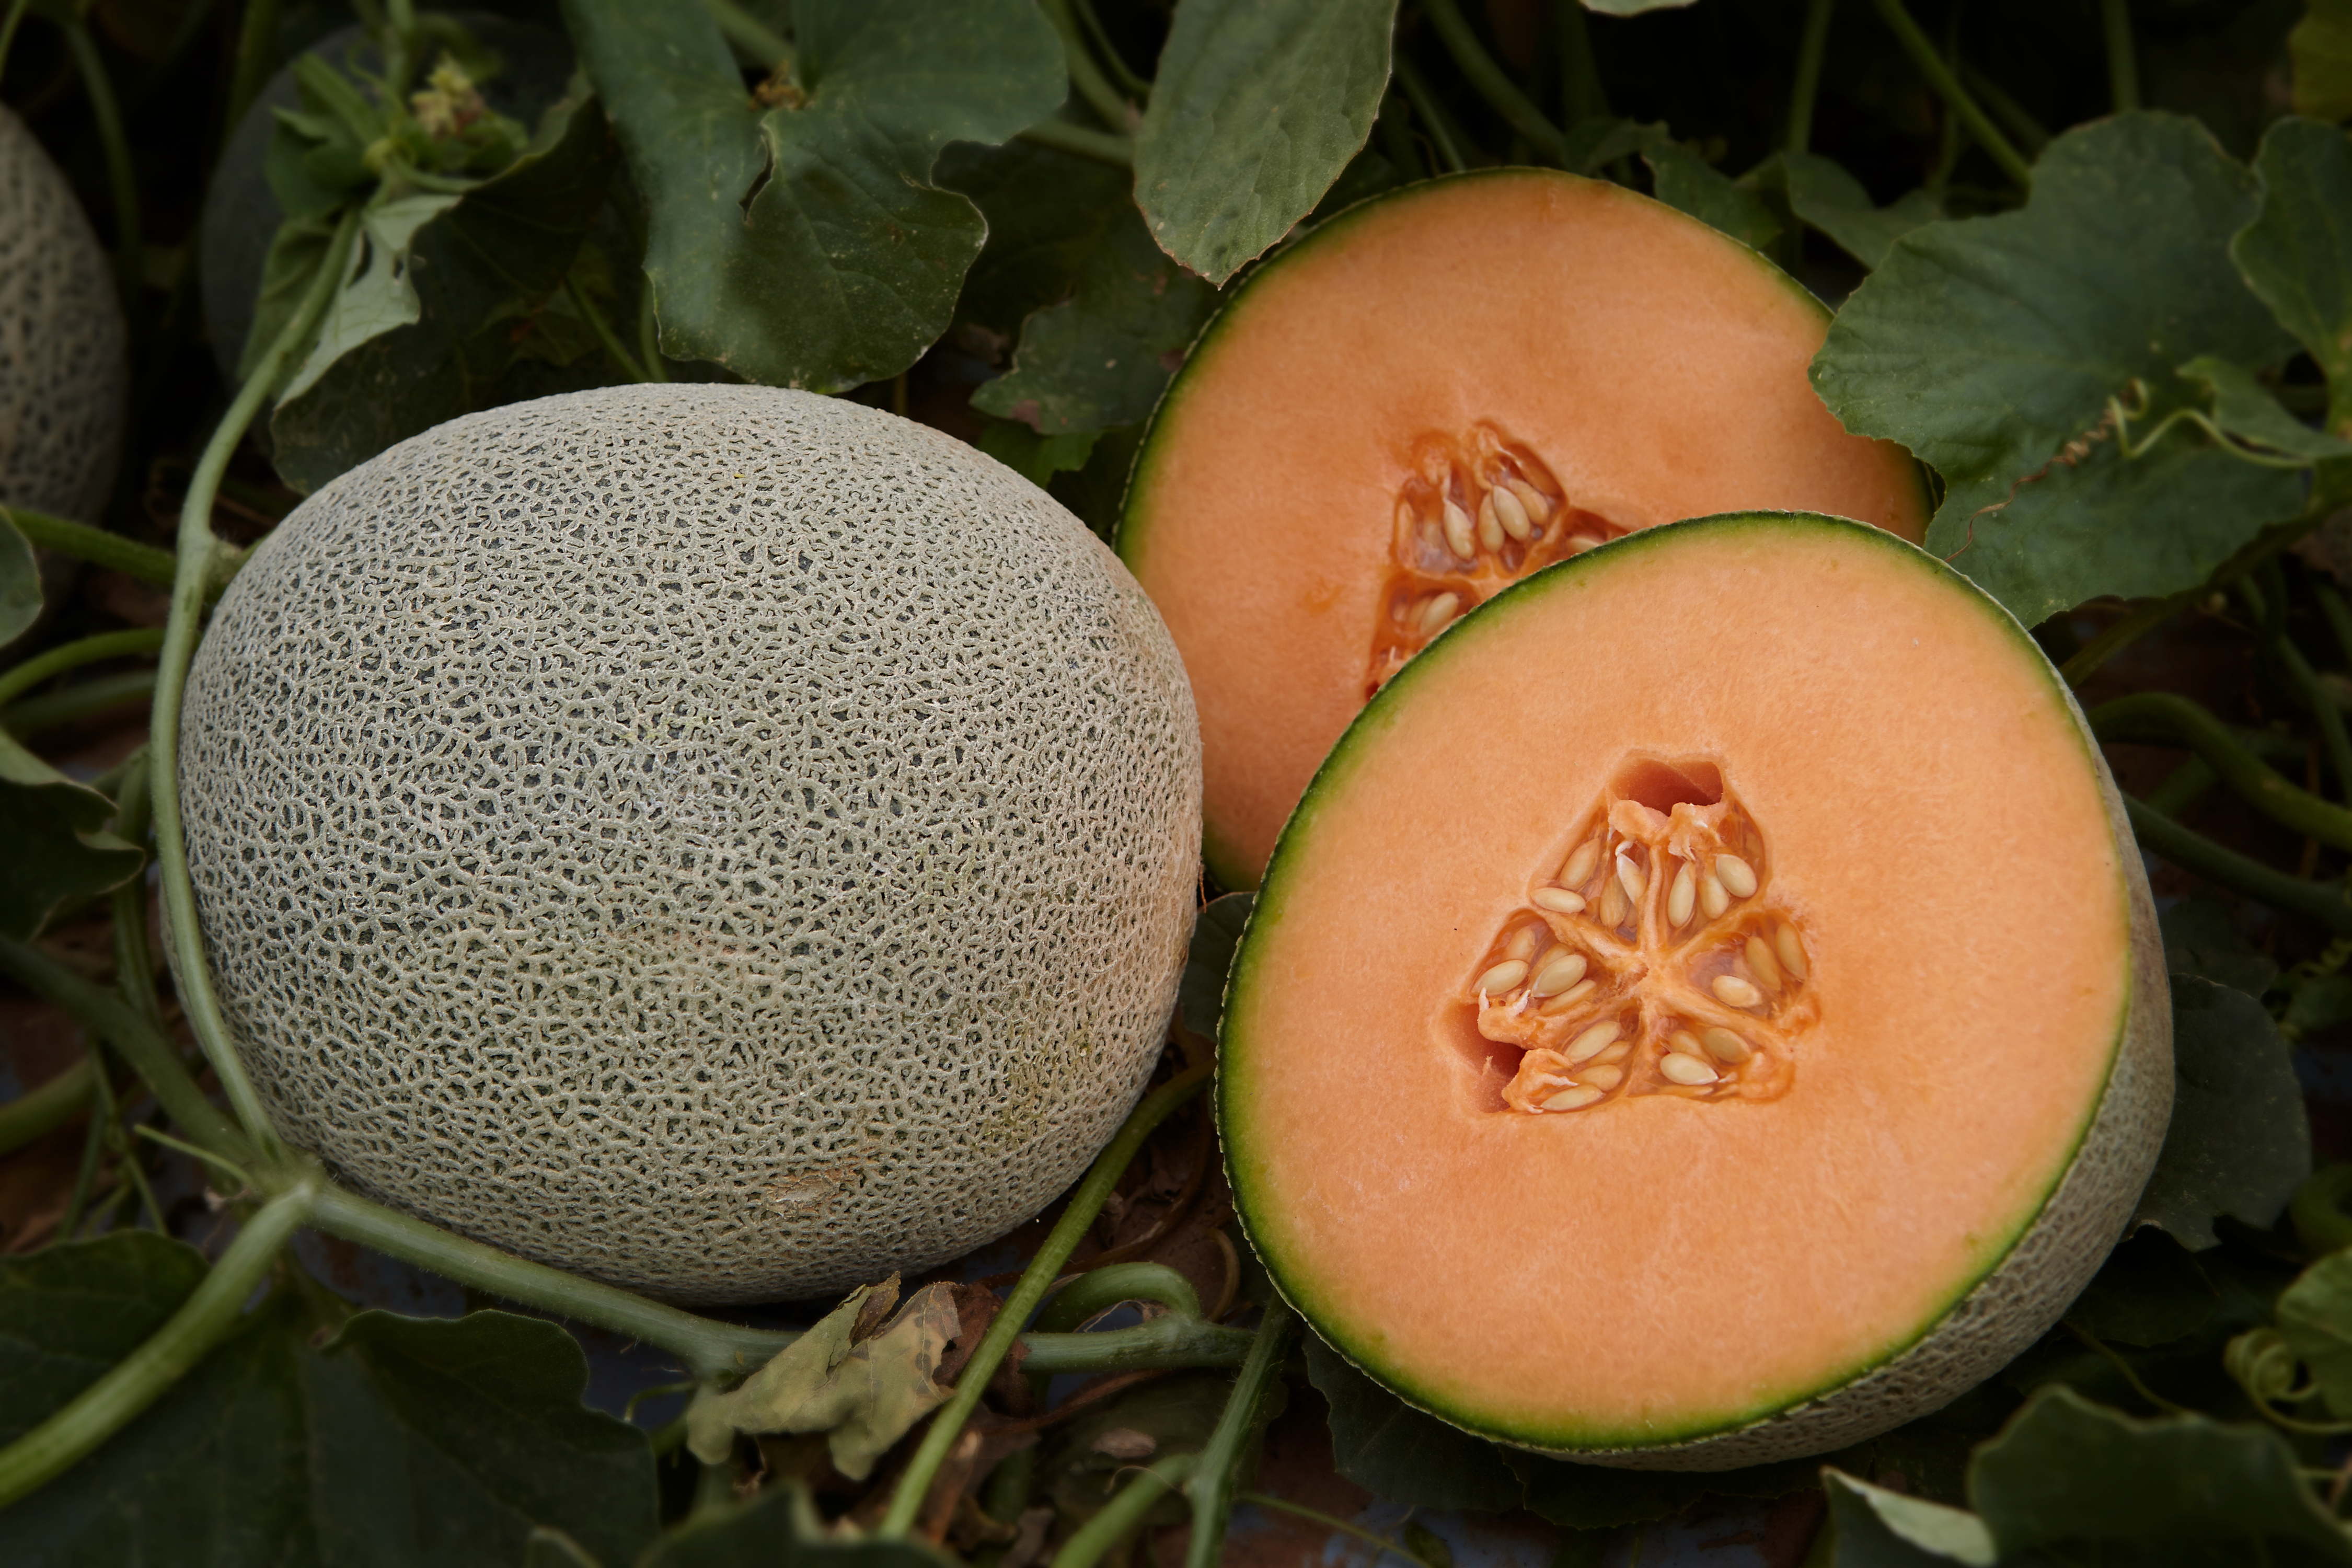 Funding to help track melons